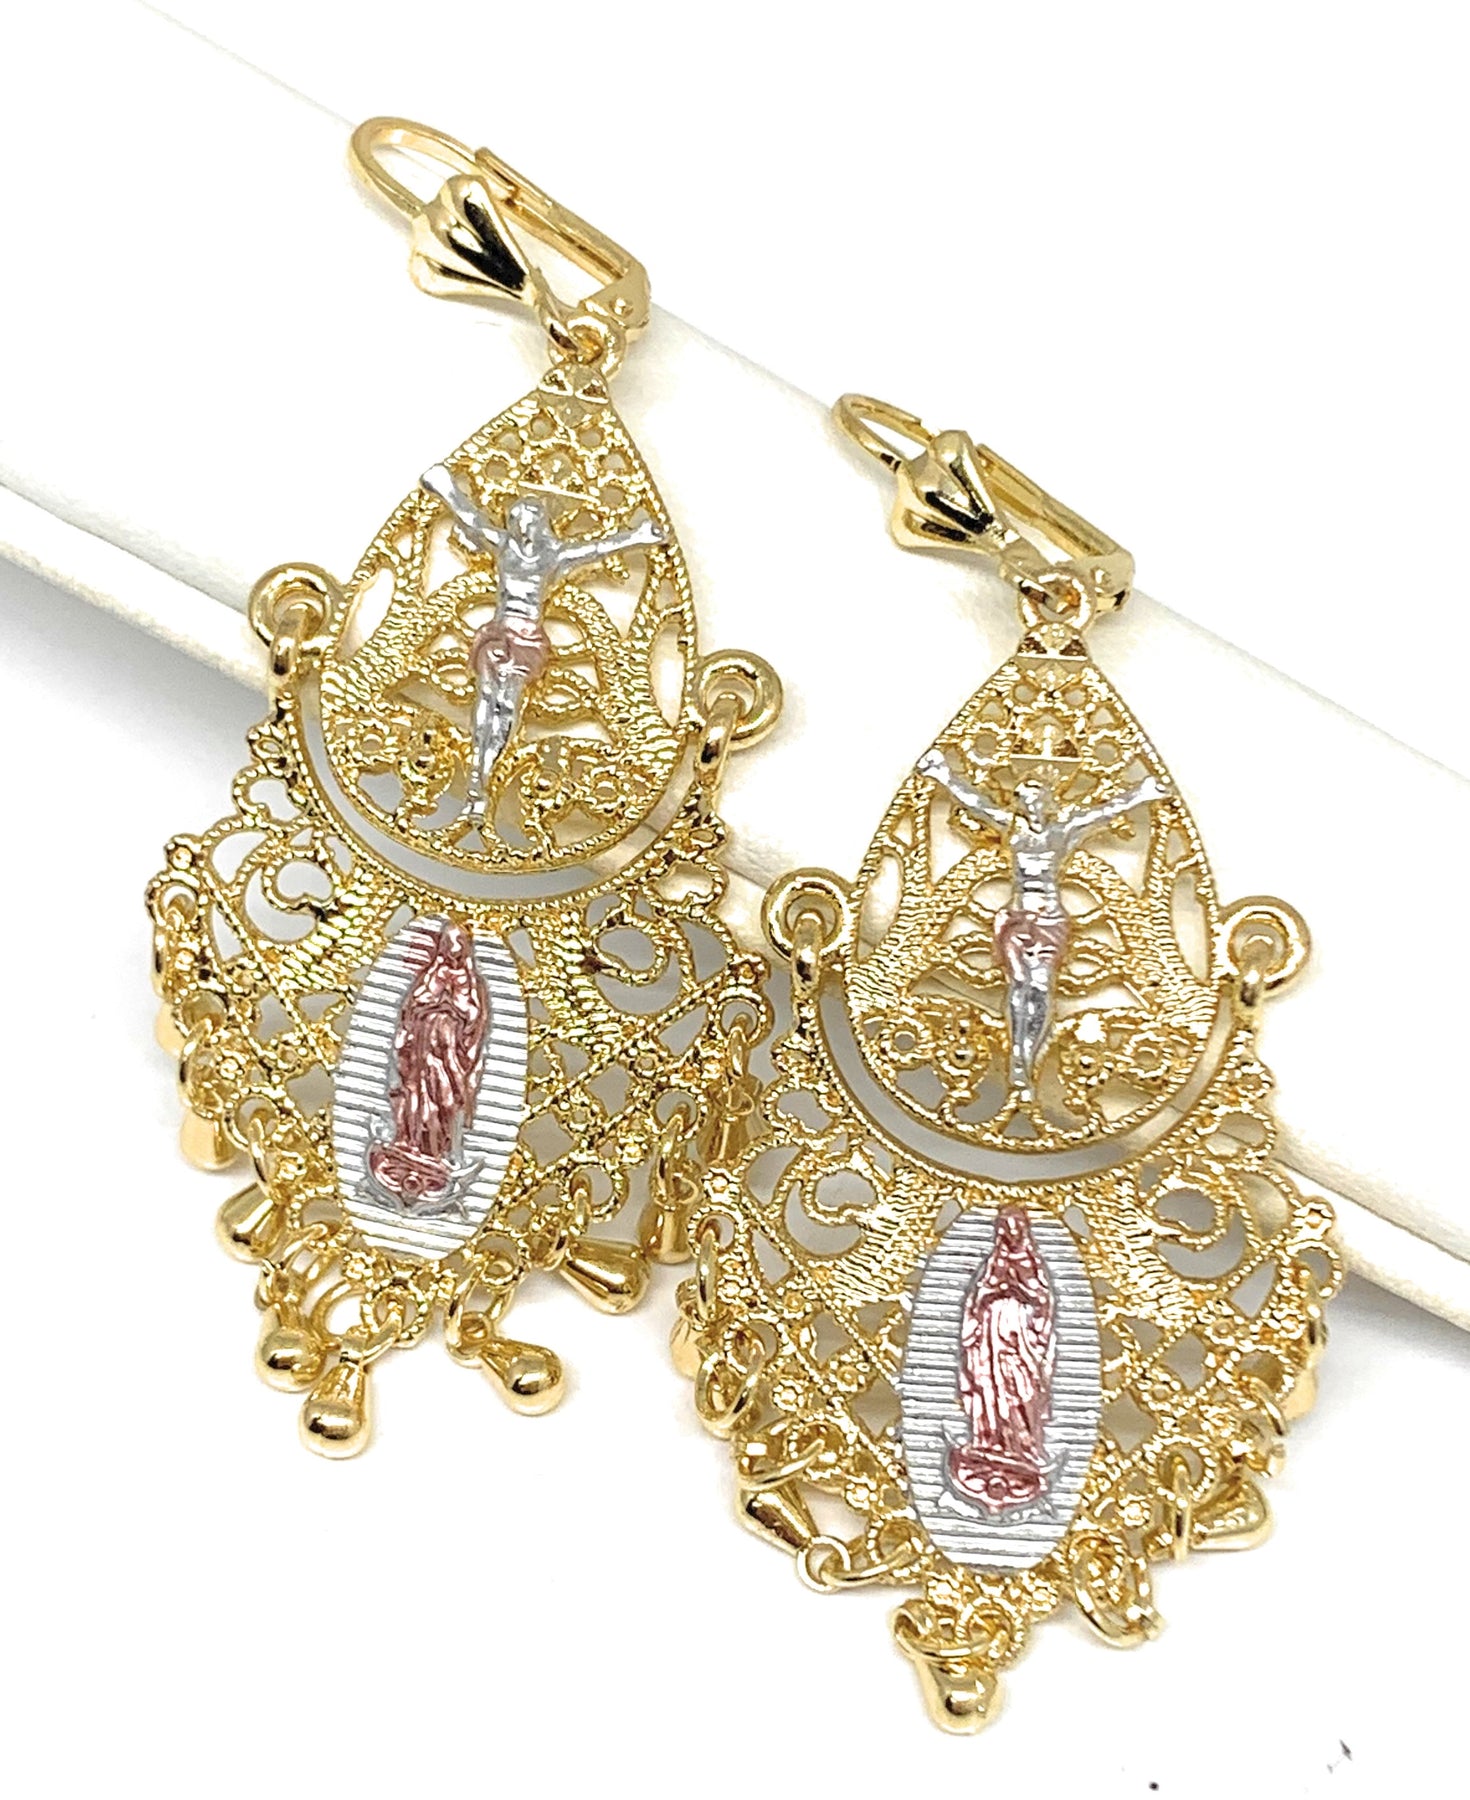 Folklorico Dance Traditional Mexican Filigree Earrings